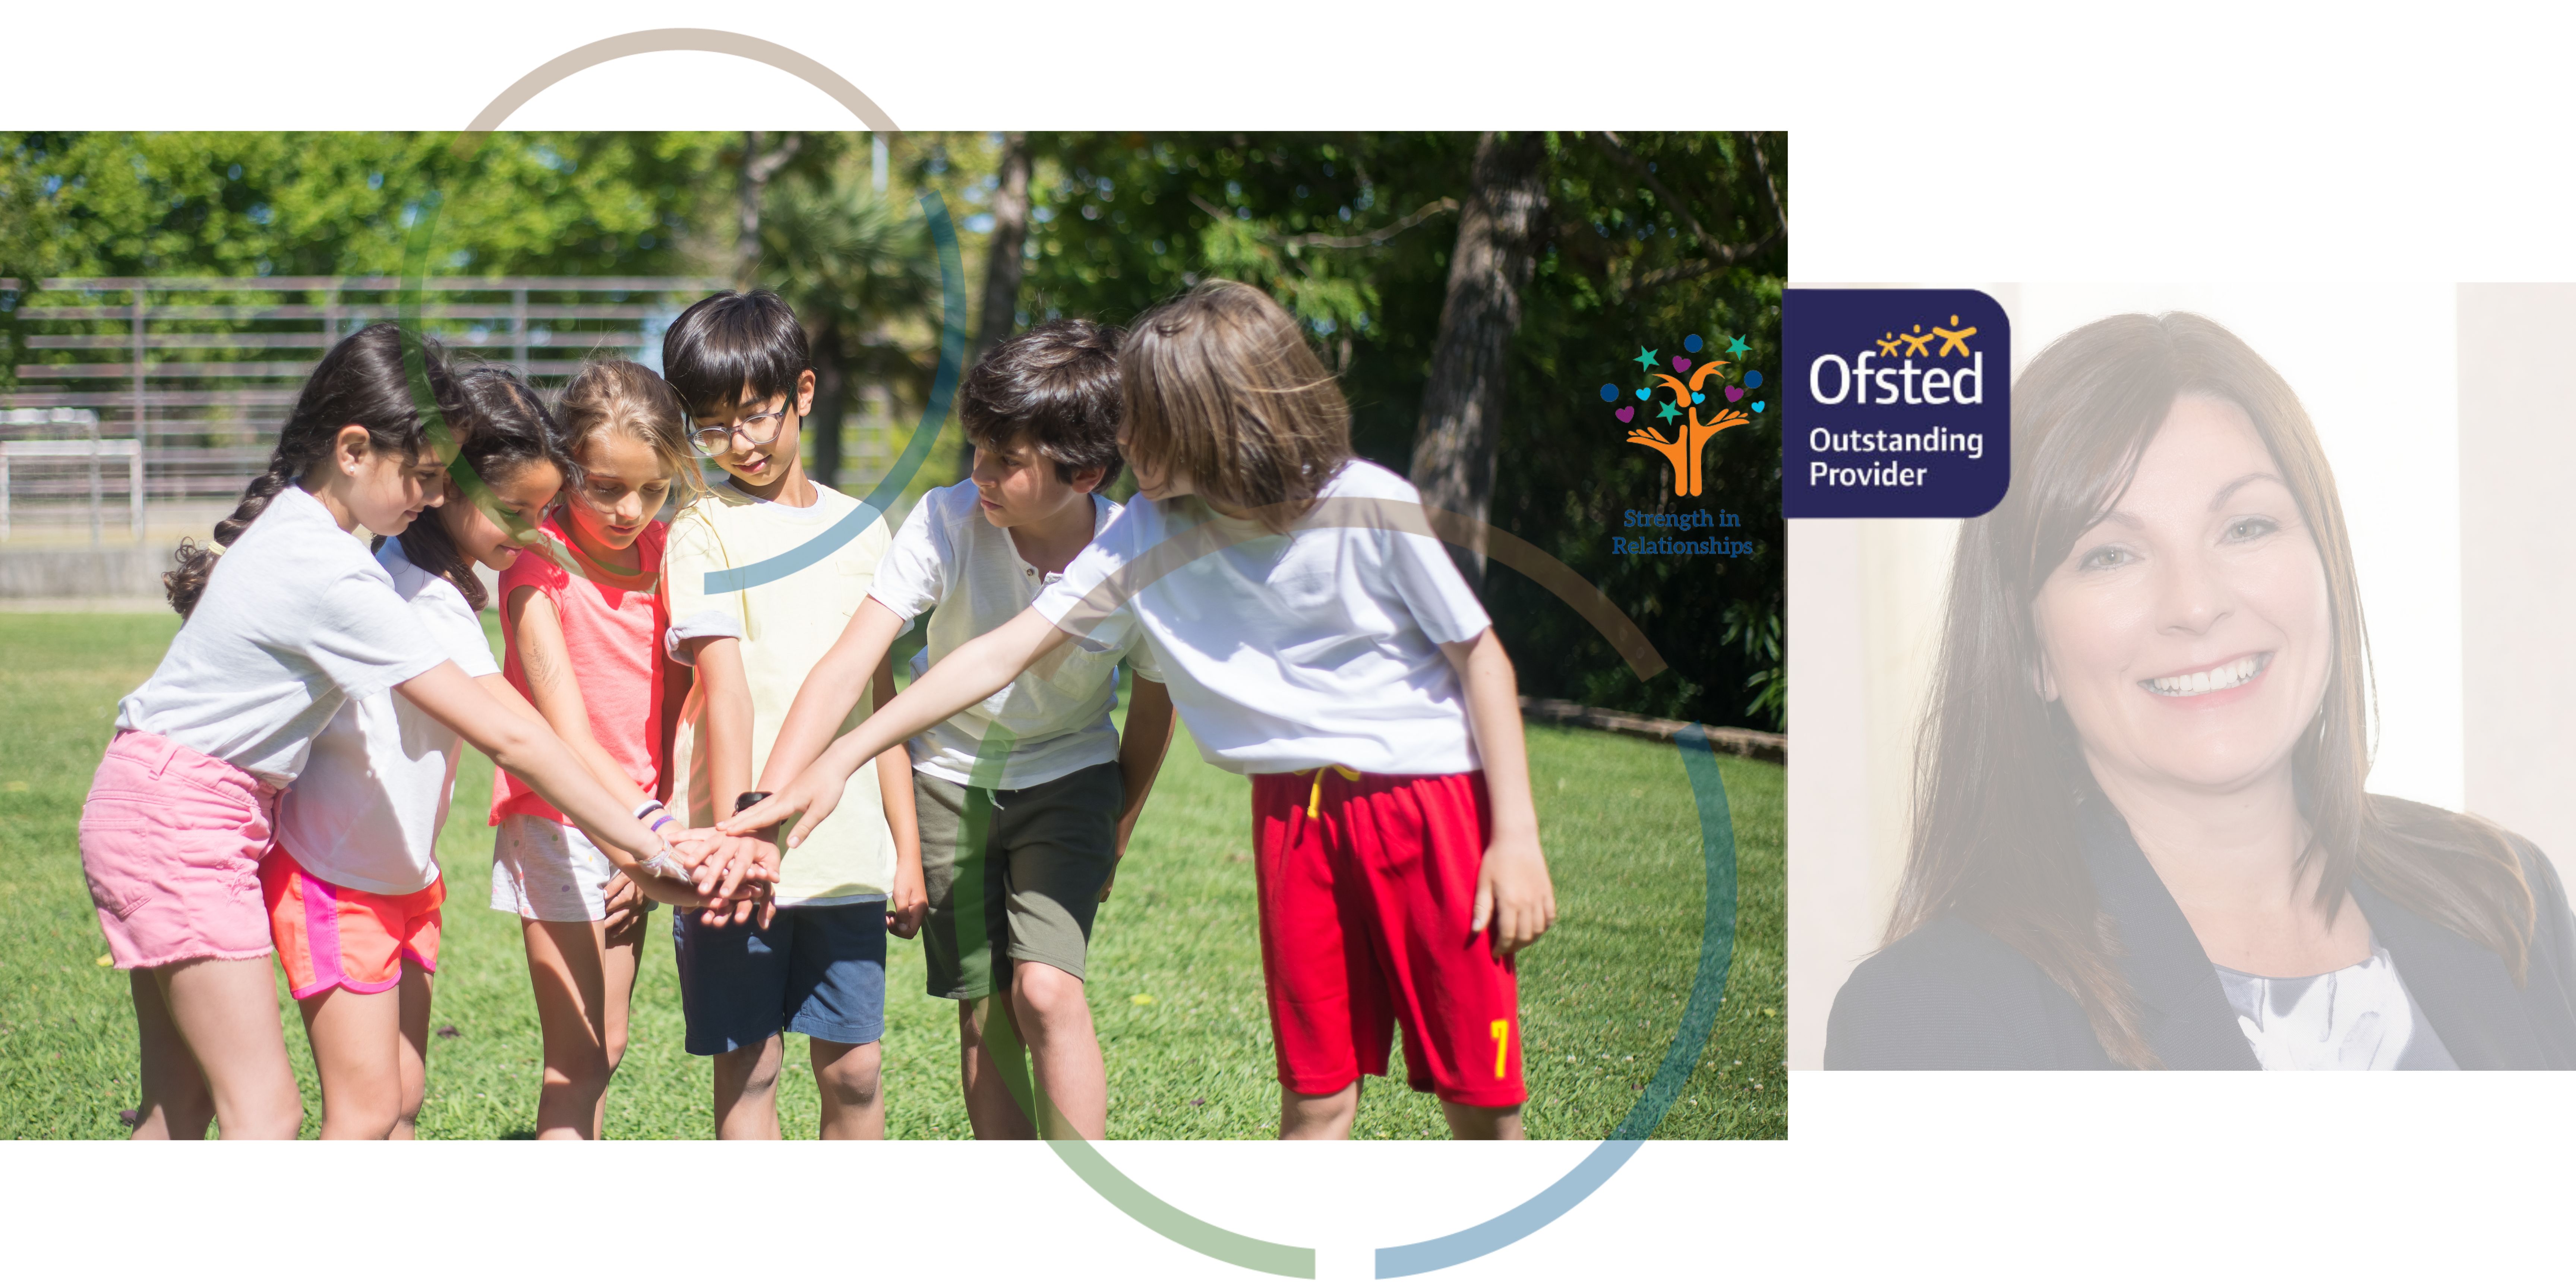 An image of children playing outside next to a portrait photograph of a member of the children and families social work team with the Ofsted and strength in relationships logos.